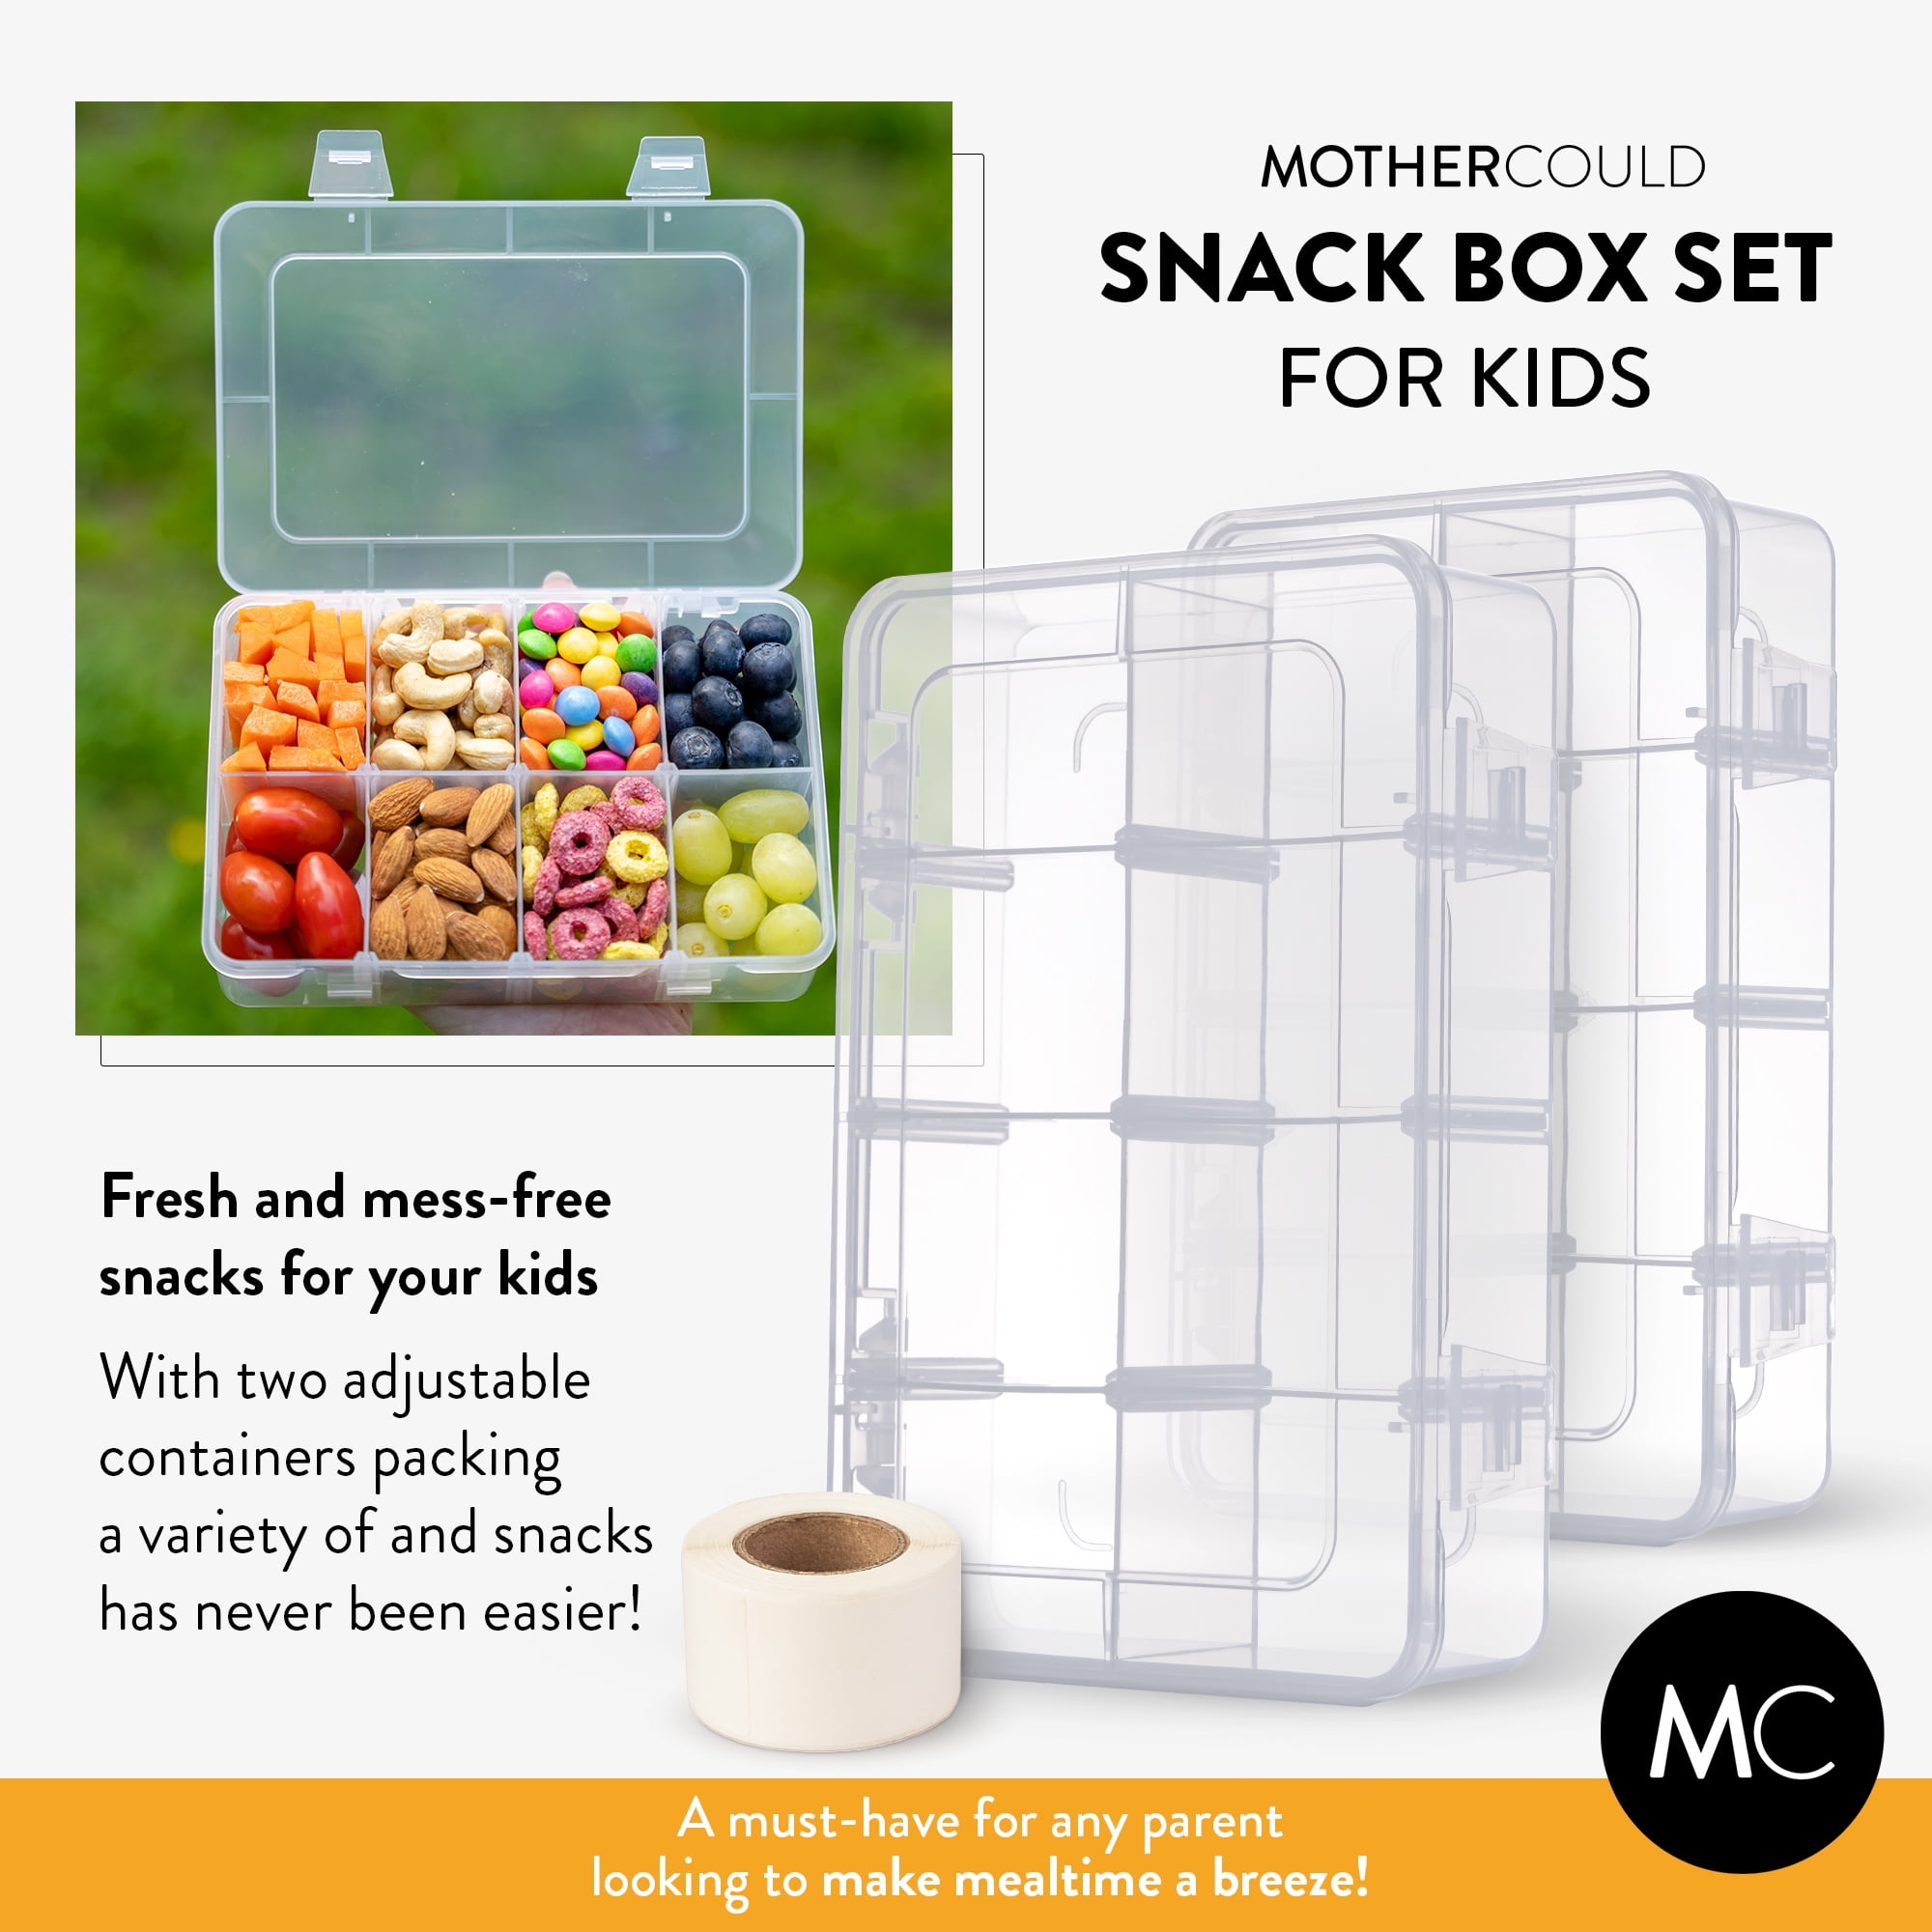 SNACKLE BOX! You know us moms (maybe some dads??) have been making our own  snackle boxes for years using whatever boxes we can find! Di